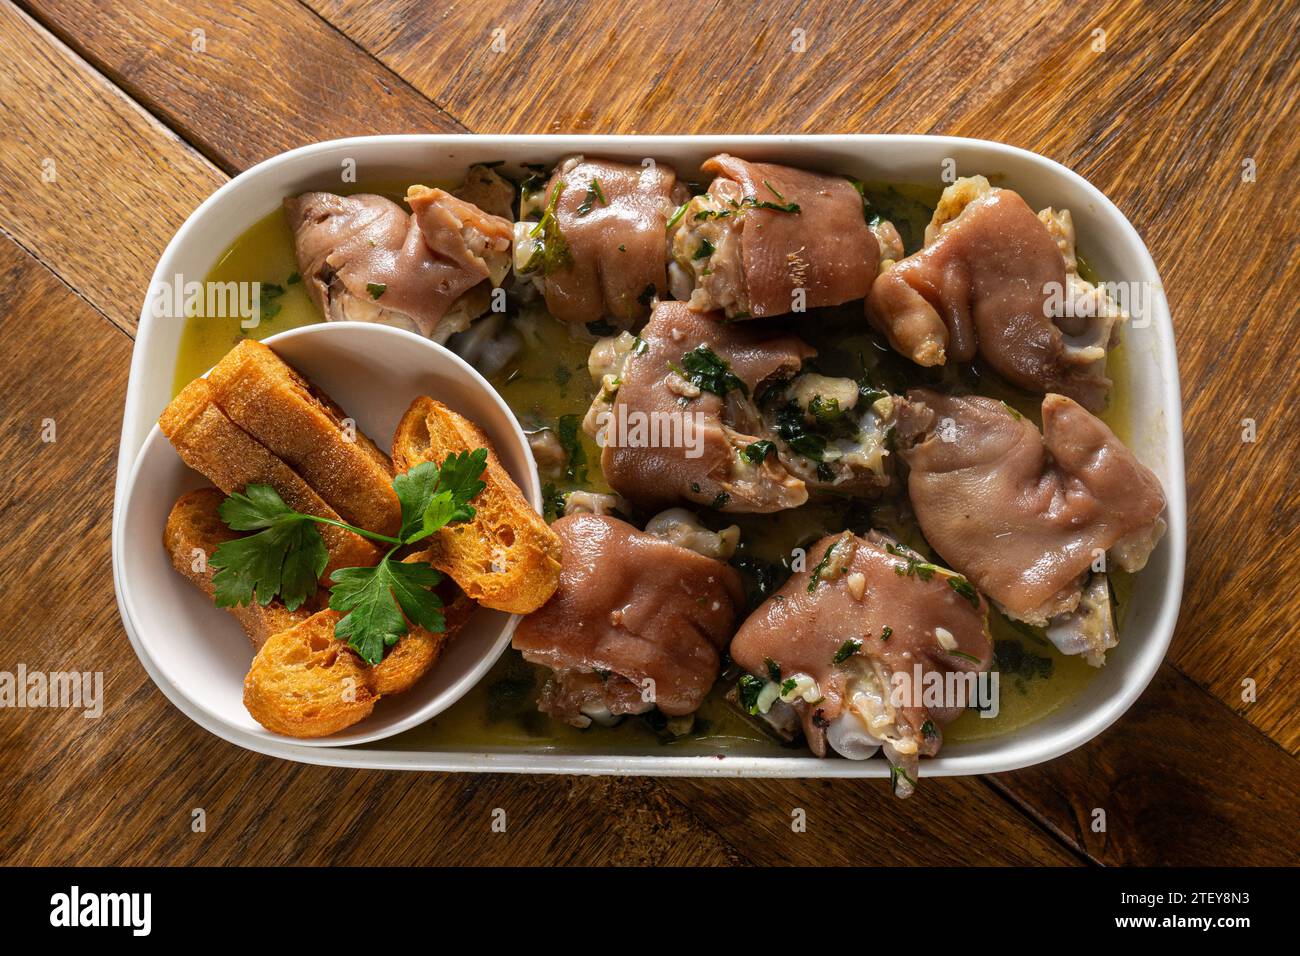 Authentic Portuguese Alentejo Pig Trotters with Coriander Sauce, a traditional delicacy capturing the essence of Portuguese cuisine. Stock Photo